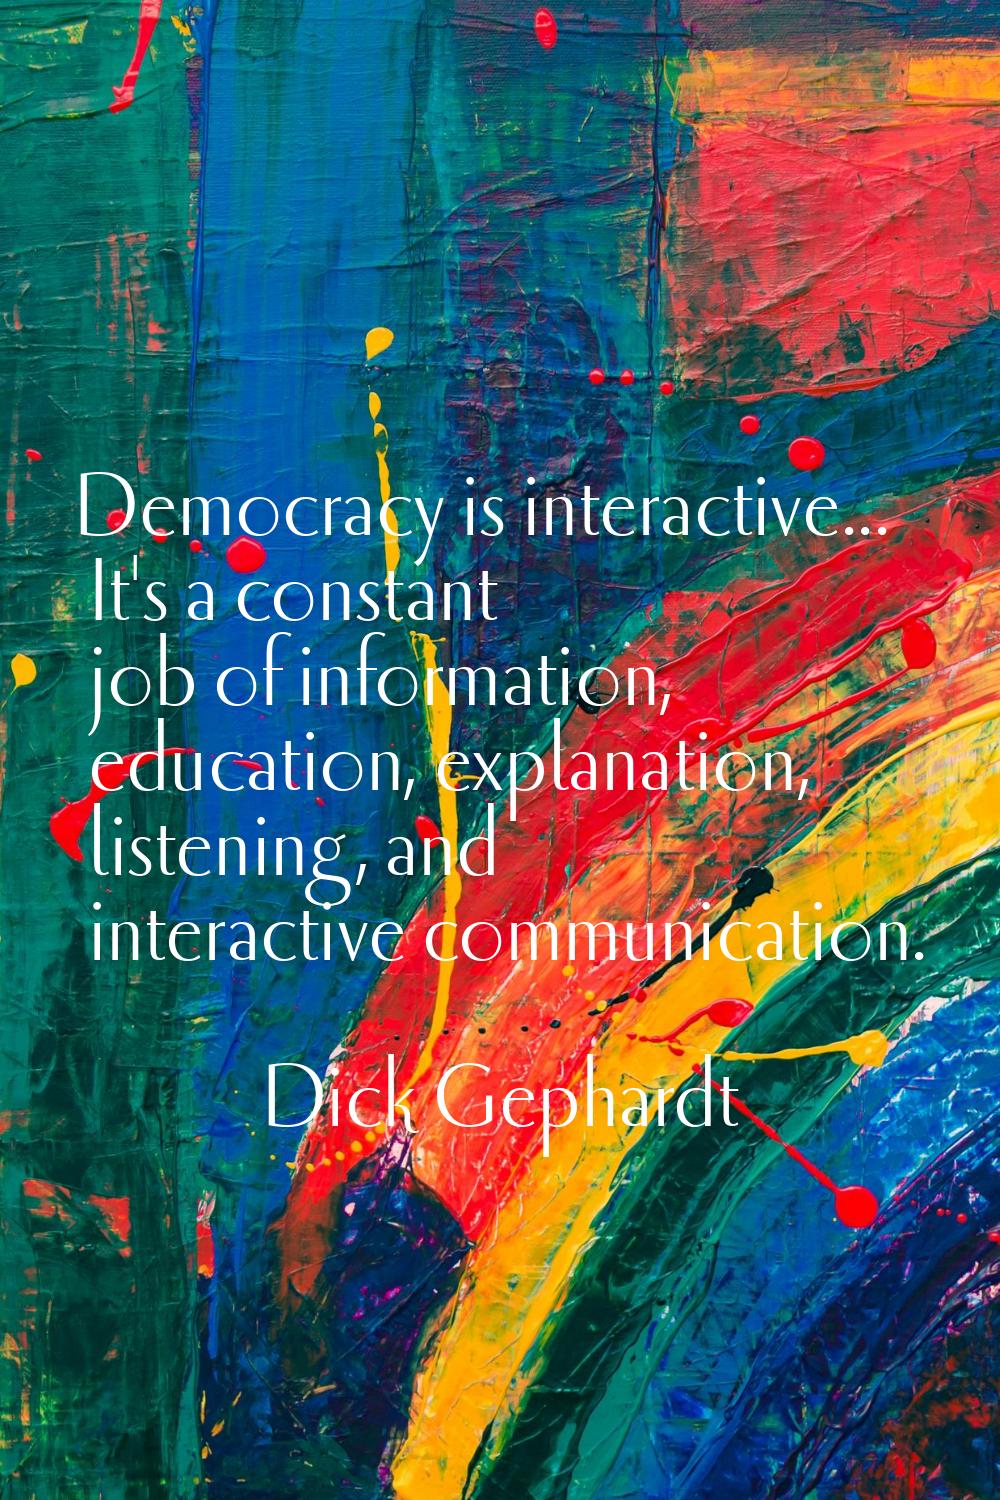 Democracy is interactive... It's a constant job of information, education, explanation, listening, 